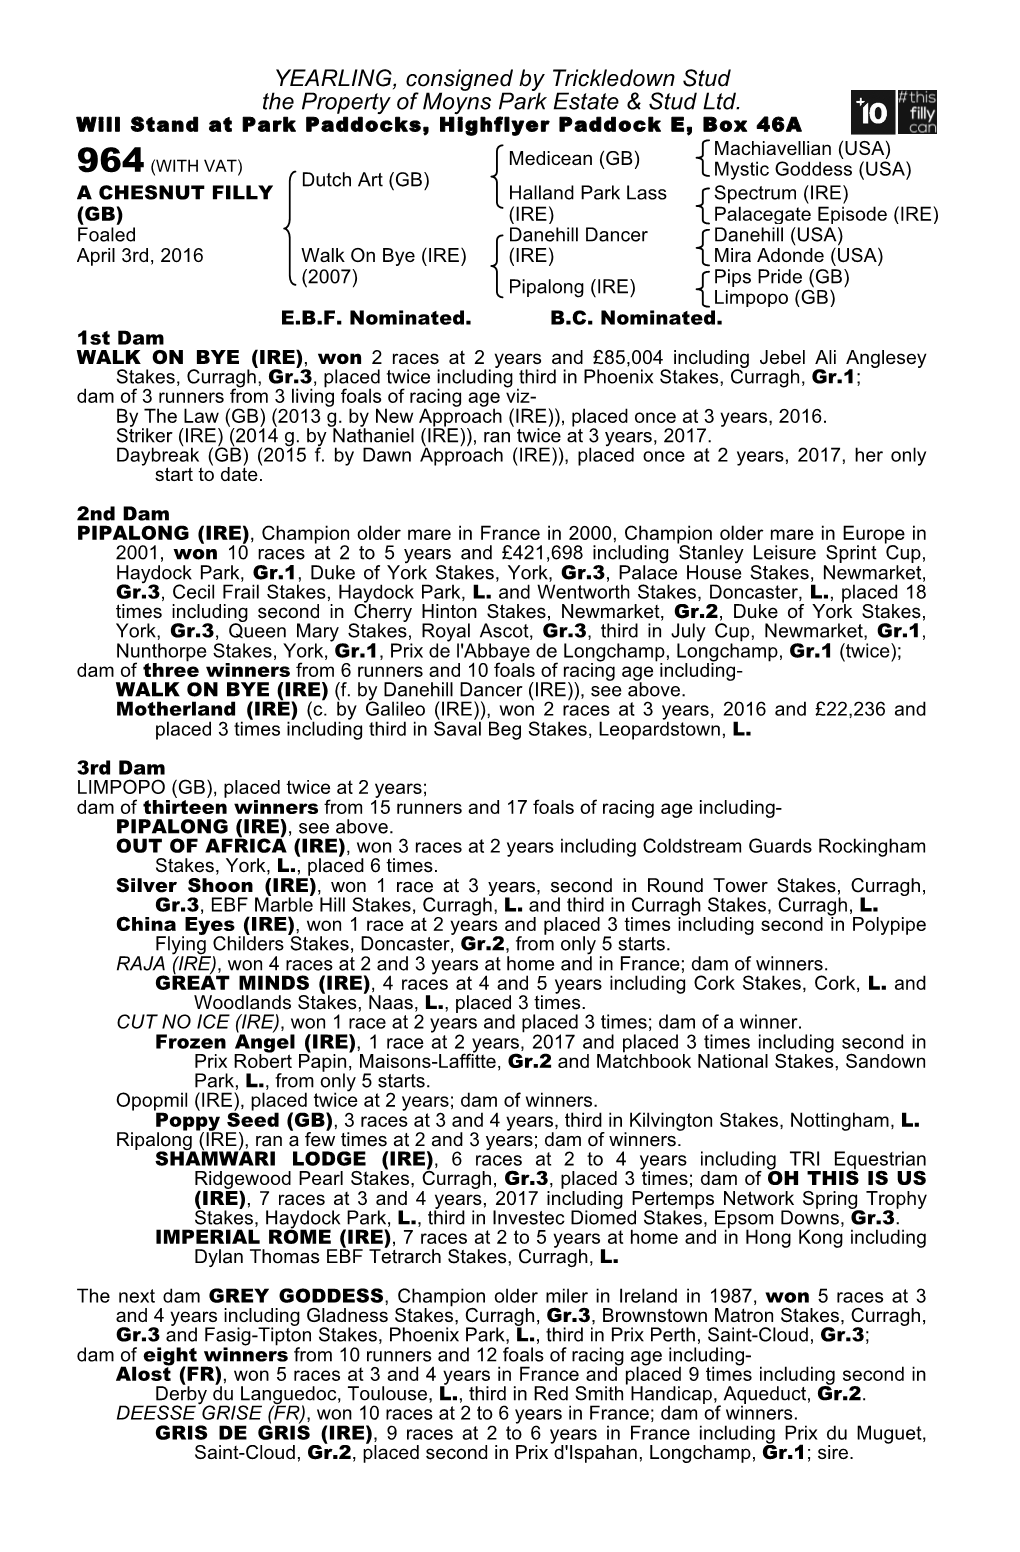 YEARLING, Consigned by Trickledown Stud the Property of Moyns Park Estate & Stud Ltd